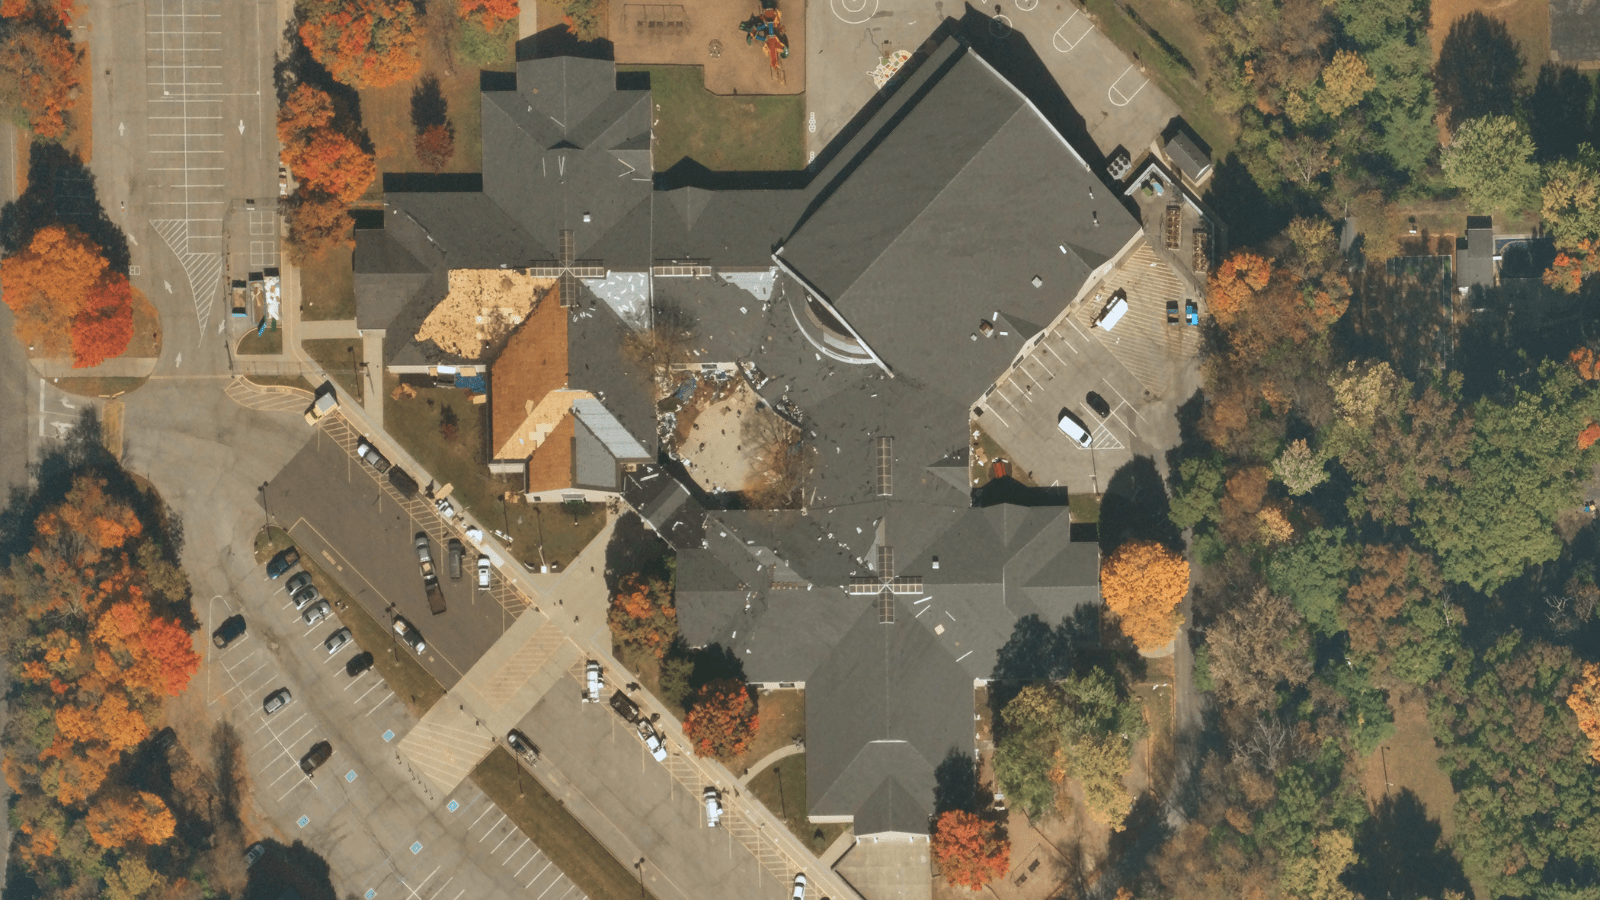 Near Space Labs 10 cm image of building undergoing roof replacement due to missing shingles.